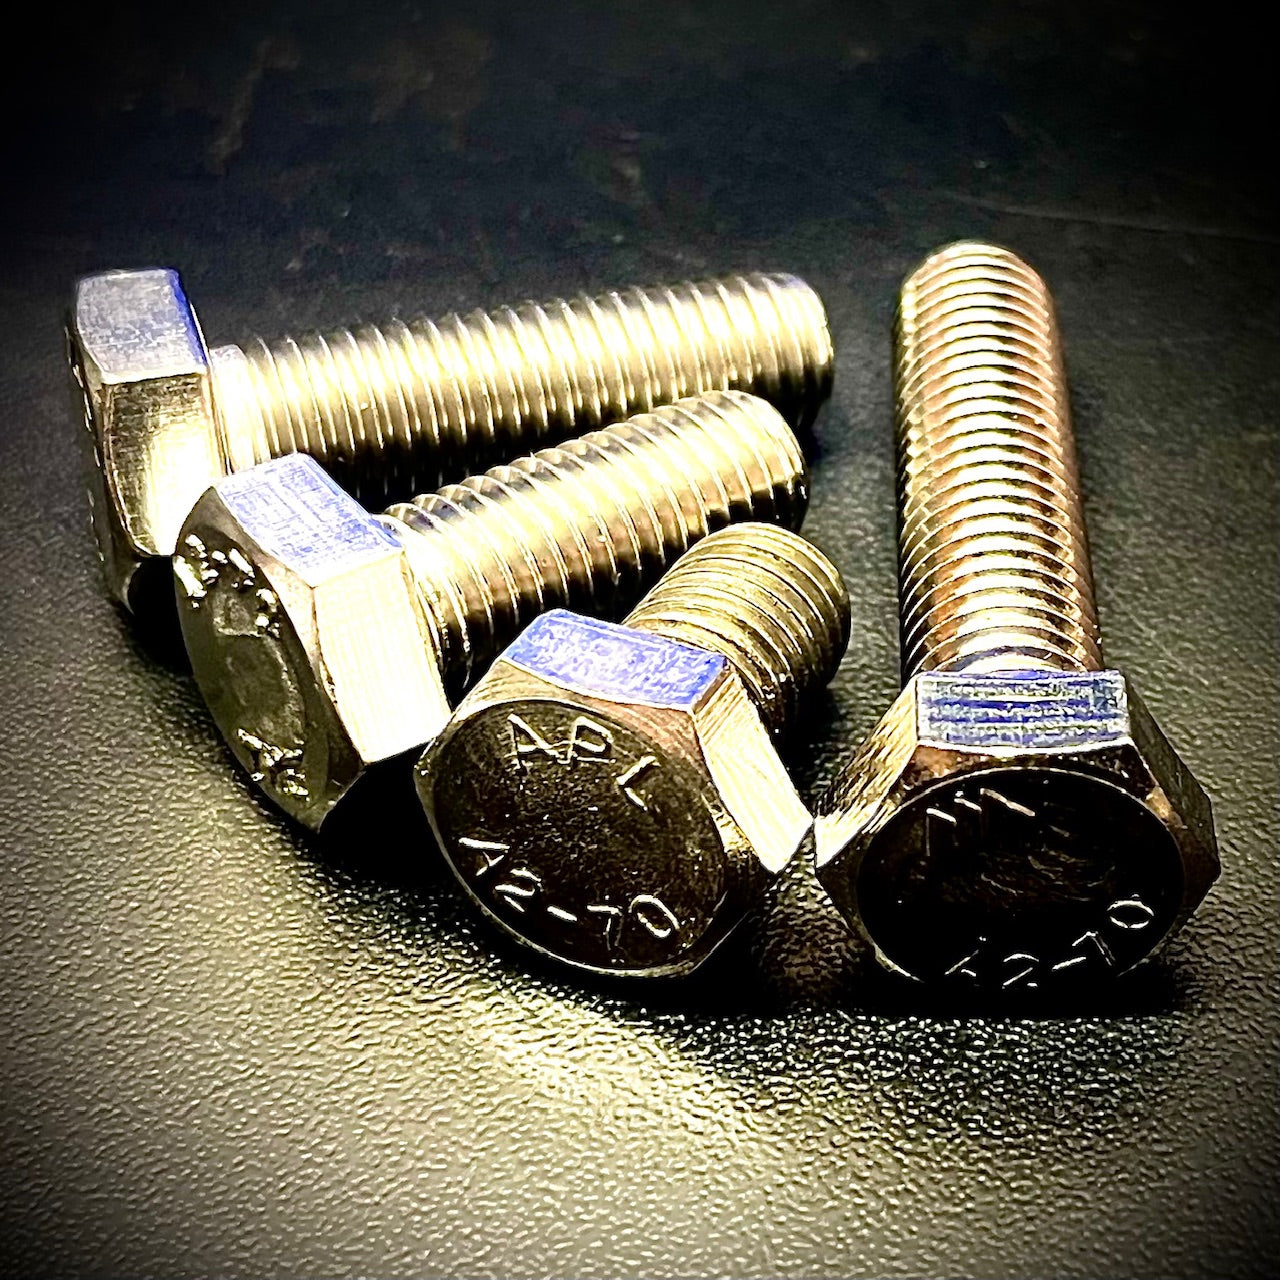 M10 x Under 65mm Hex Set Screw A2 304 Stainless Steel - Fixaball Ltd. Fixings and Fasteners UK